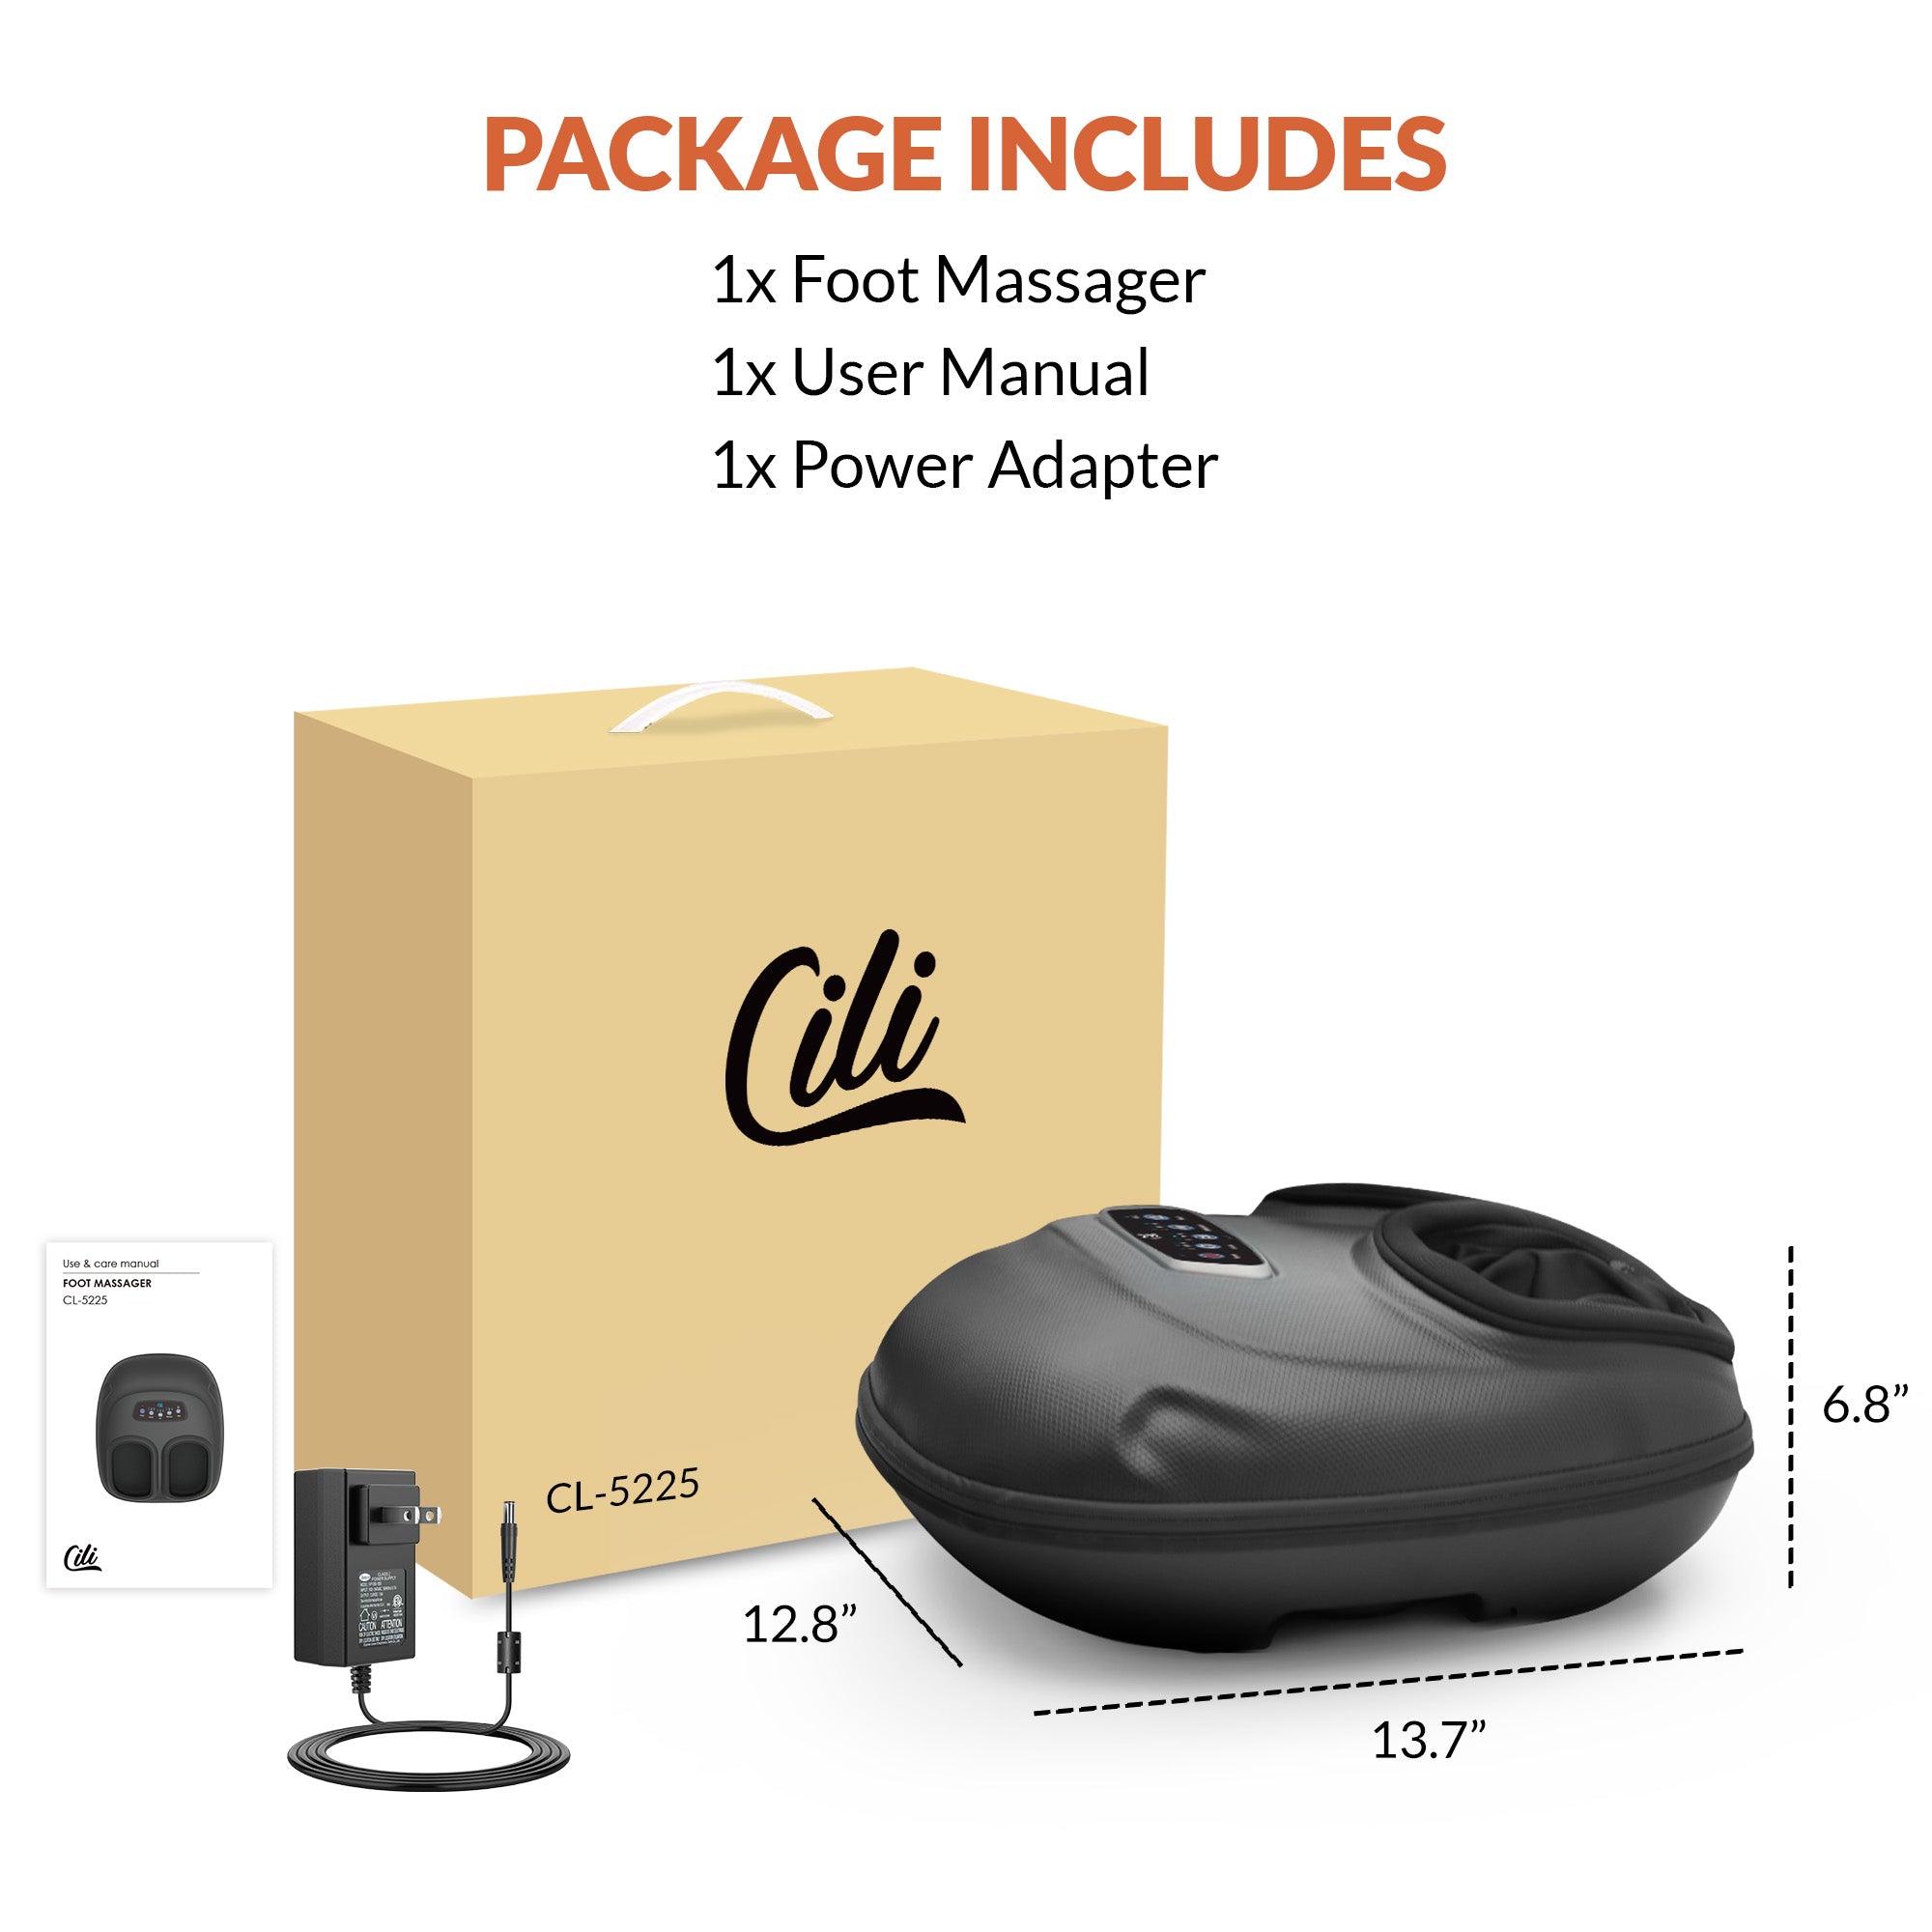 CILI Foot Massager Machine, Feet Massager With 3 Kneading Intensities, Detachable Foot Sleeve, Foot Massager Plantar Fasciitis Relief, Shiatsu Foot Massager Fits Size Up to 13 (Black)  CL-5225